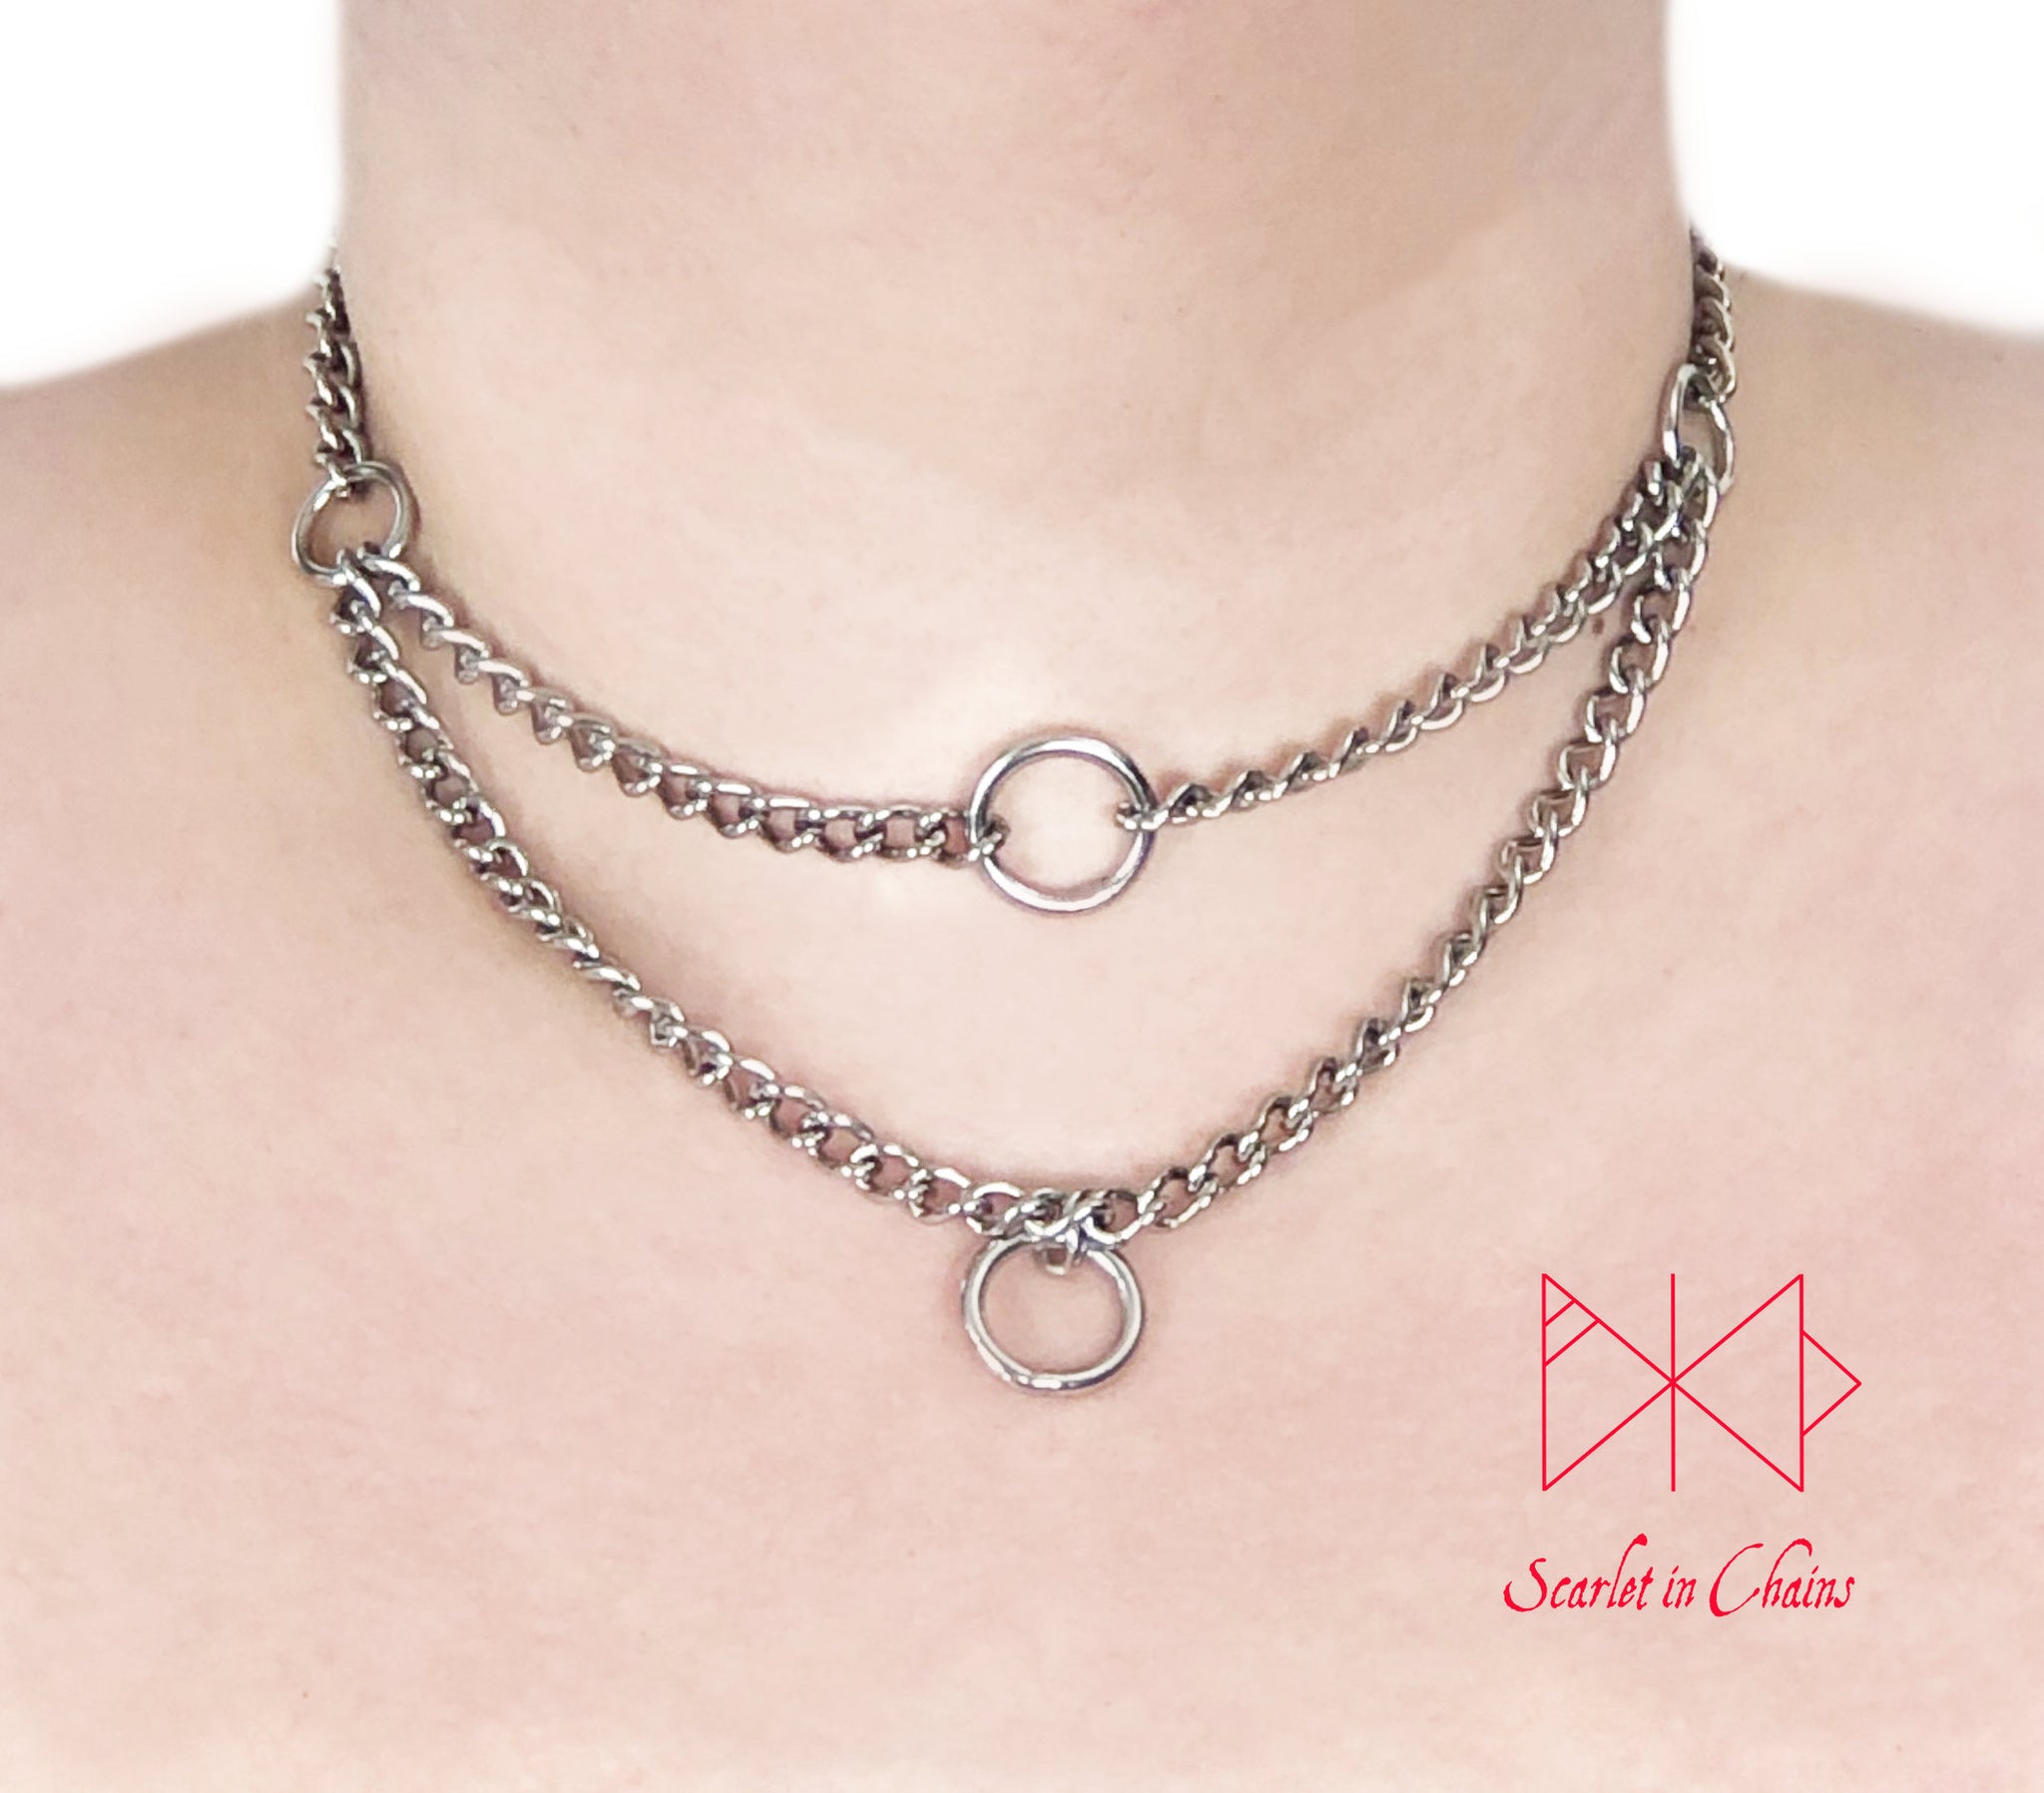 Stainless steel micro chain multi layer choker, tope layer is an O ring choker with a O ring pendant for the second layer.